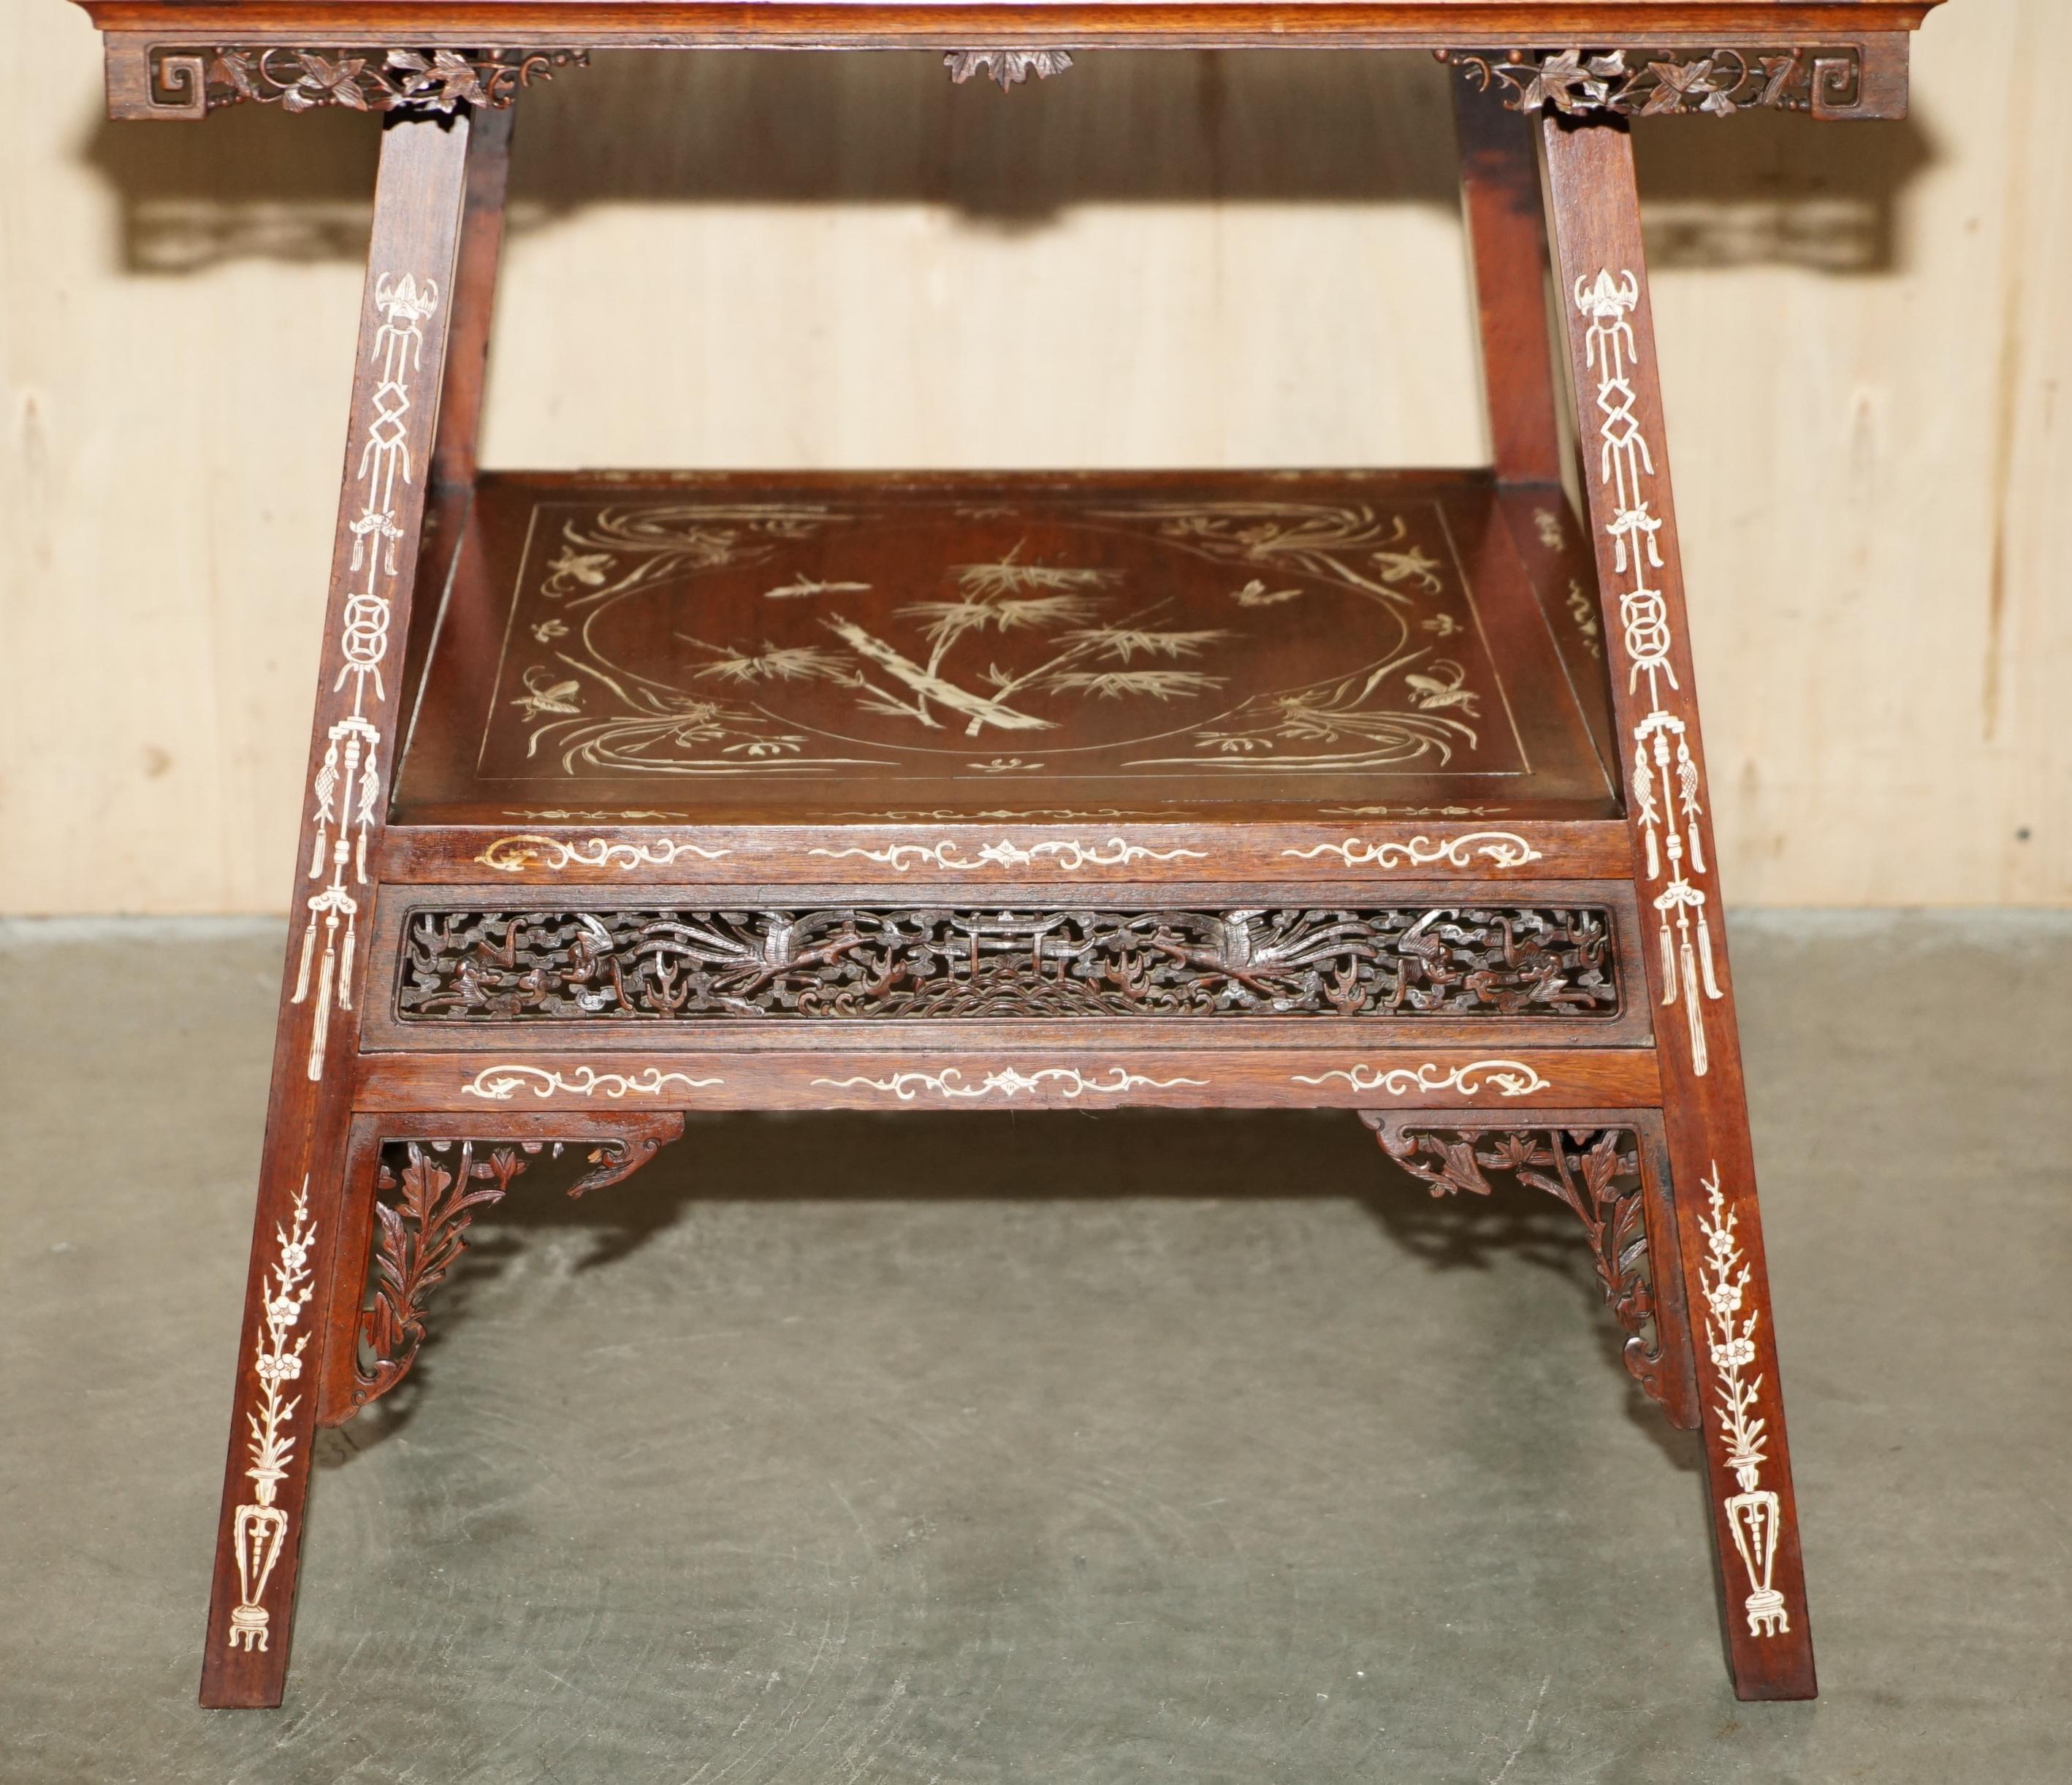 ANTIQUE CIRCA 1900ORNATELY CARVED AND HEAViLY INLAID CHINESE OCCASIONAL TABLE (Holz) im Angebot